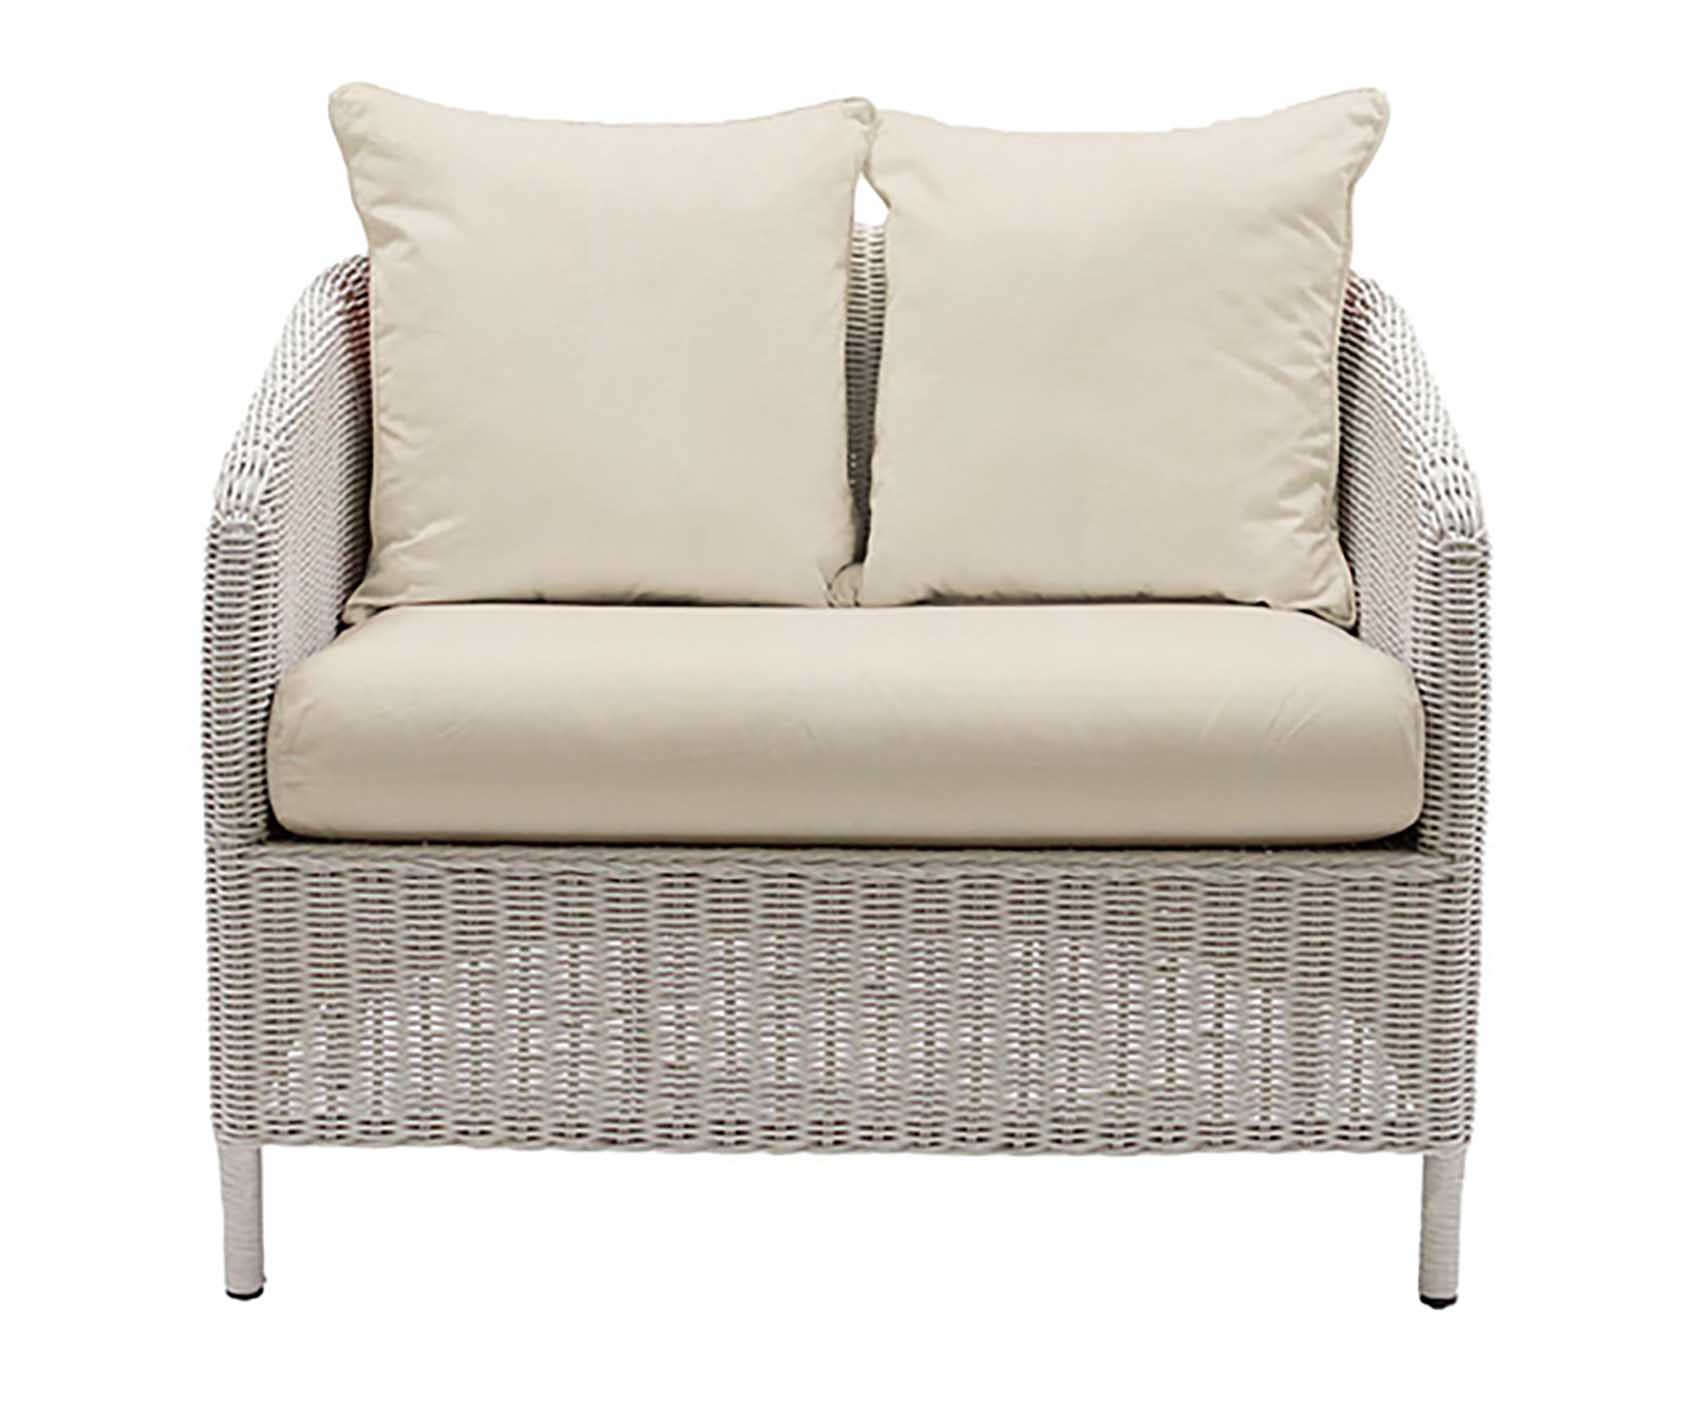 Arley Outdoor Snuggle Chair by Laura Ashley